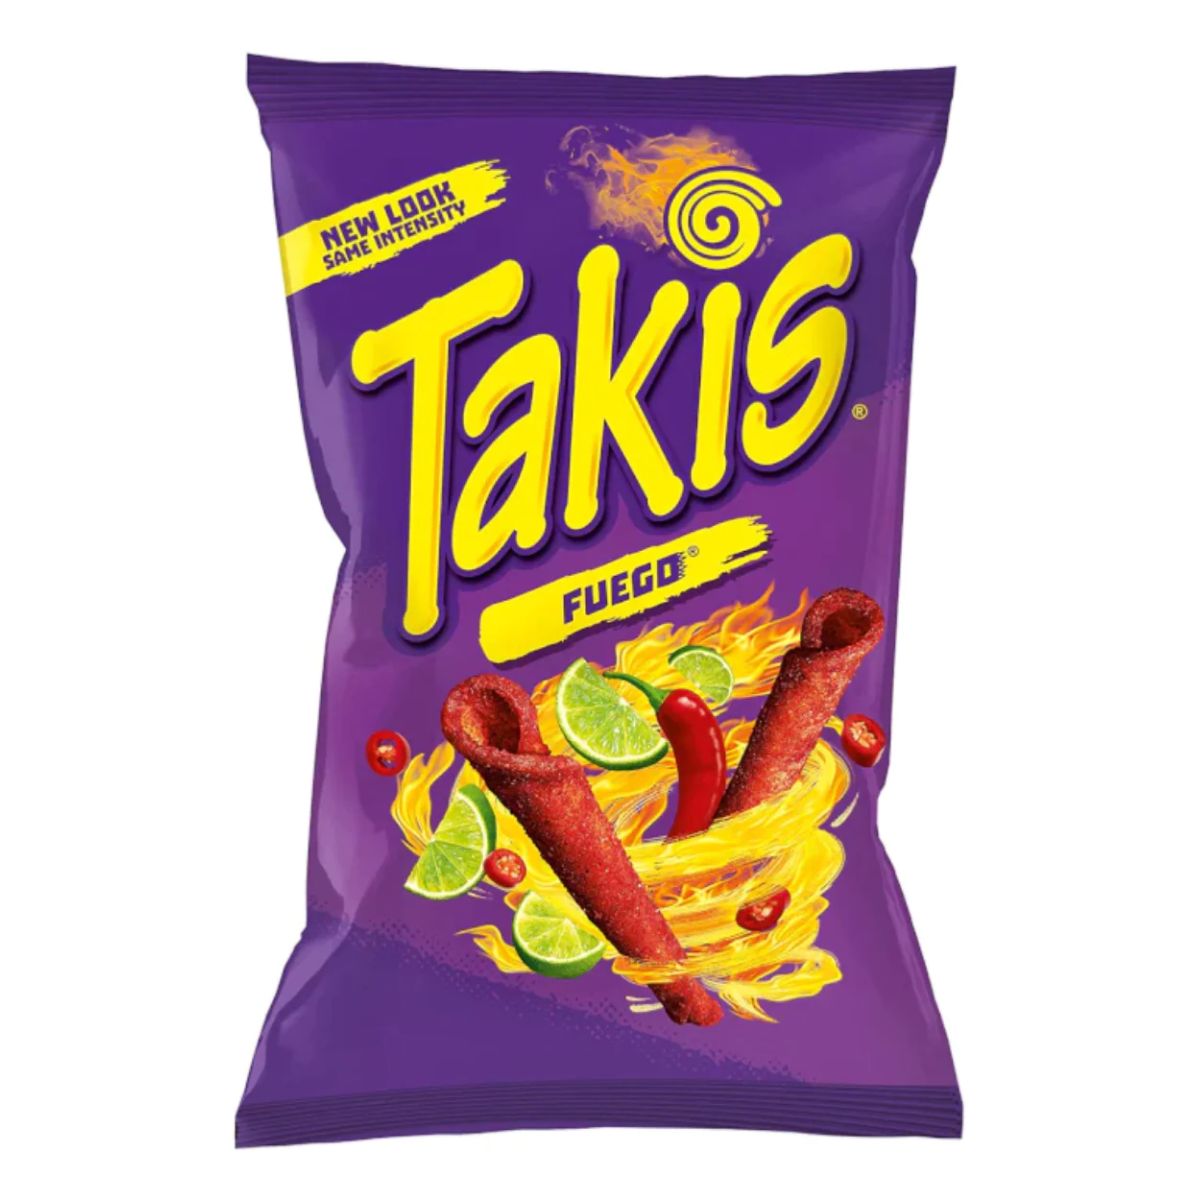 A bag of Takis - Fuego - 180g, a hot chili pepper and lime-flavored rolled corn snack.